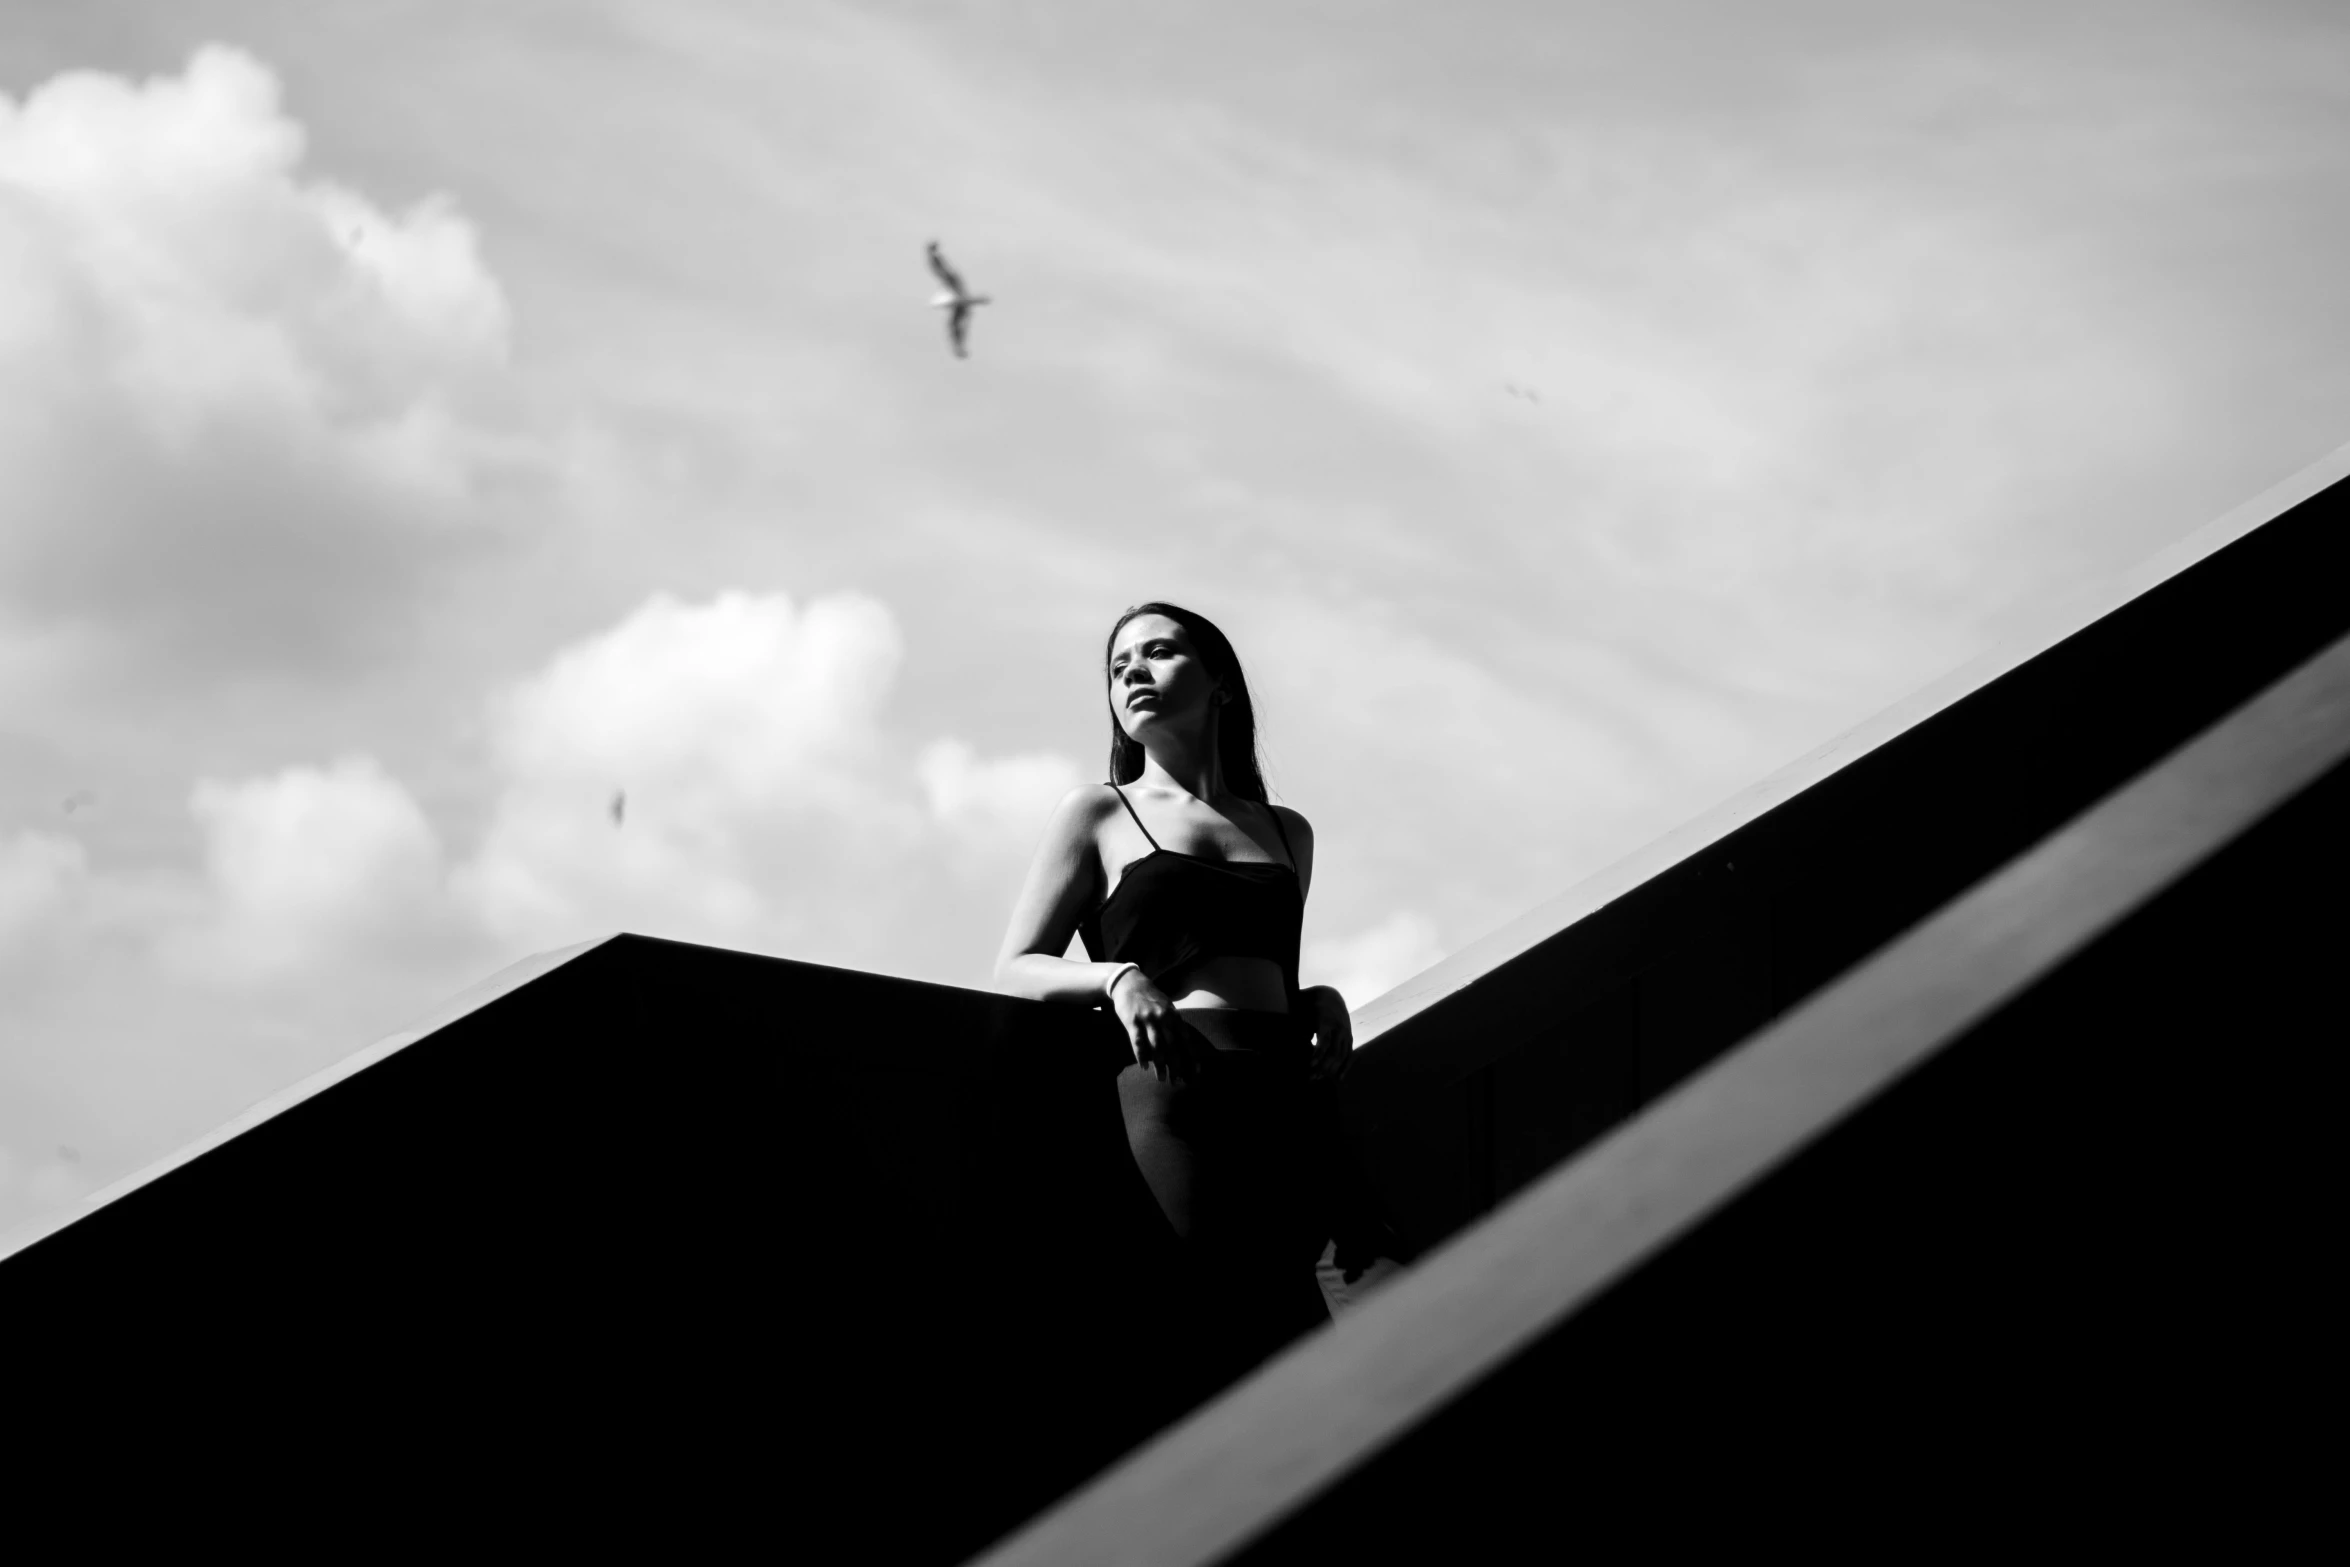 a woman stands on the edge of a wall as a bird flies overhead